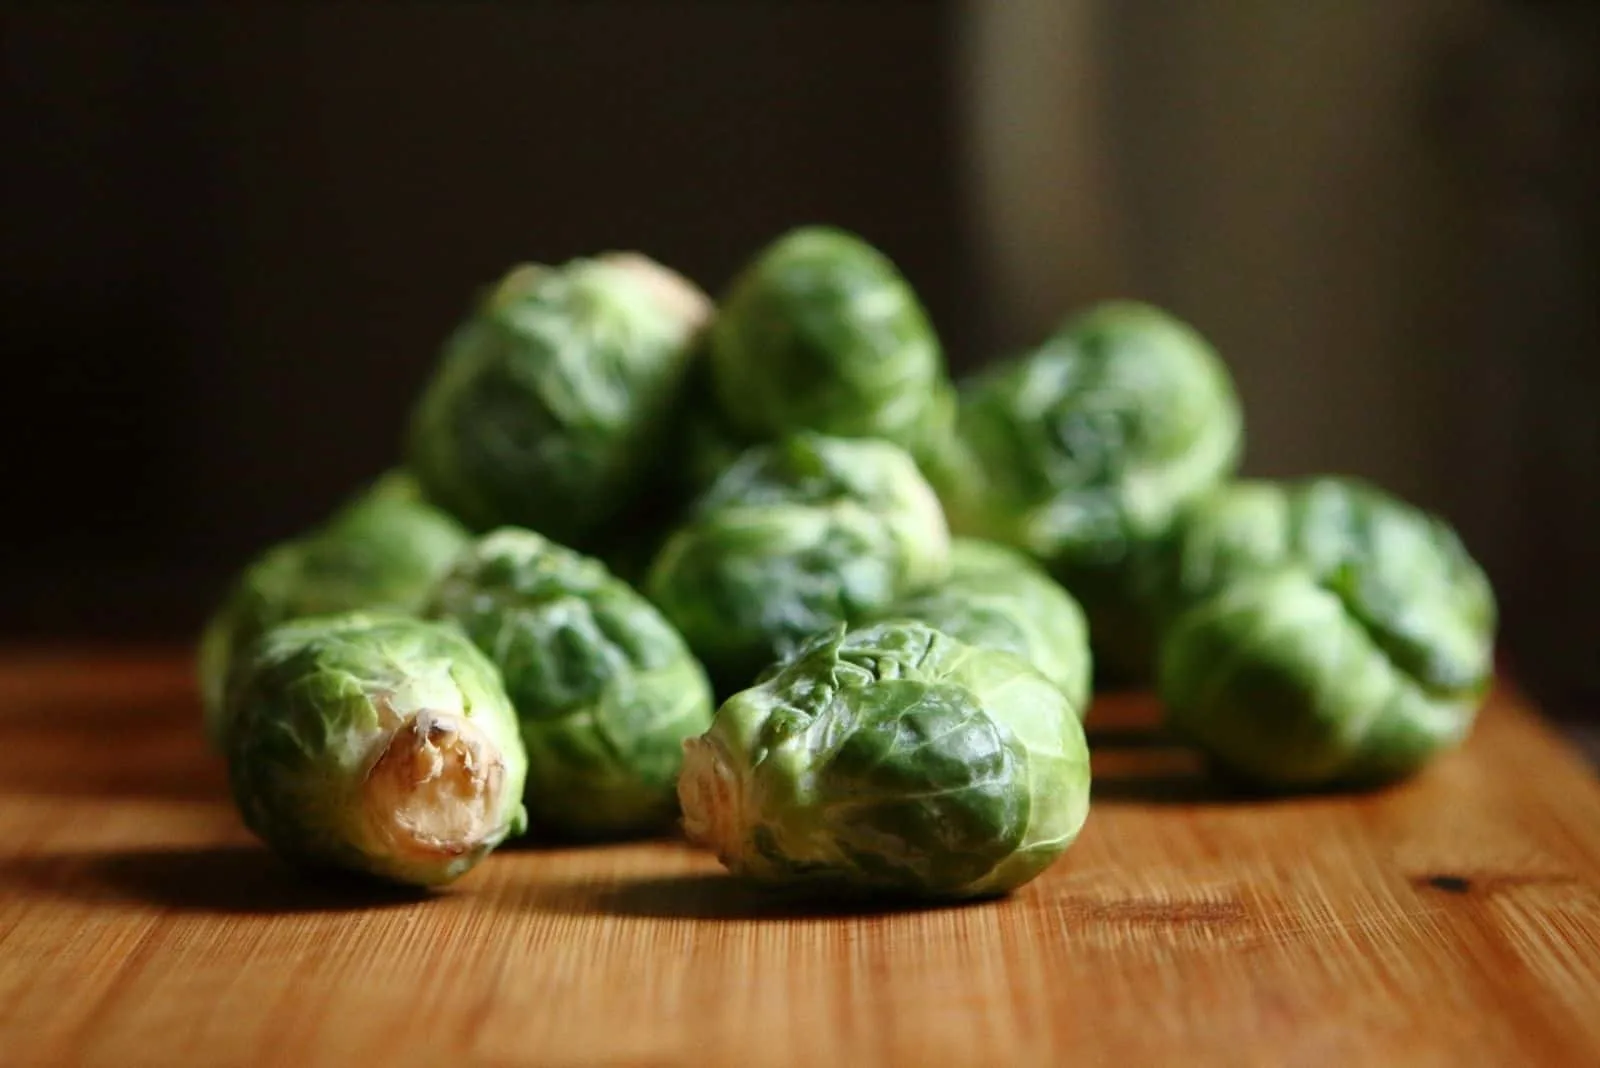 few brussel sprouts on top of the wooden table